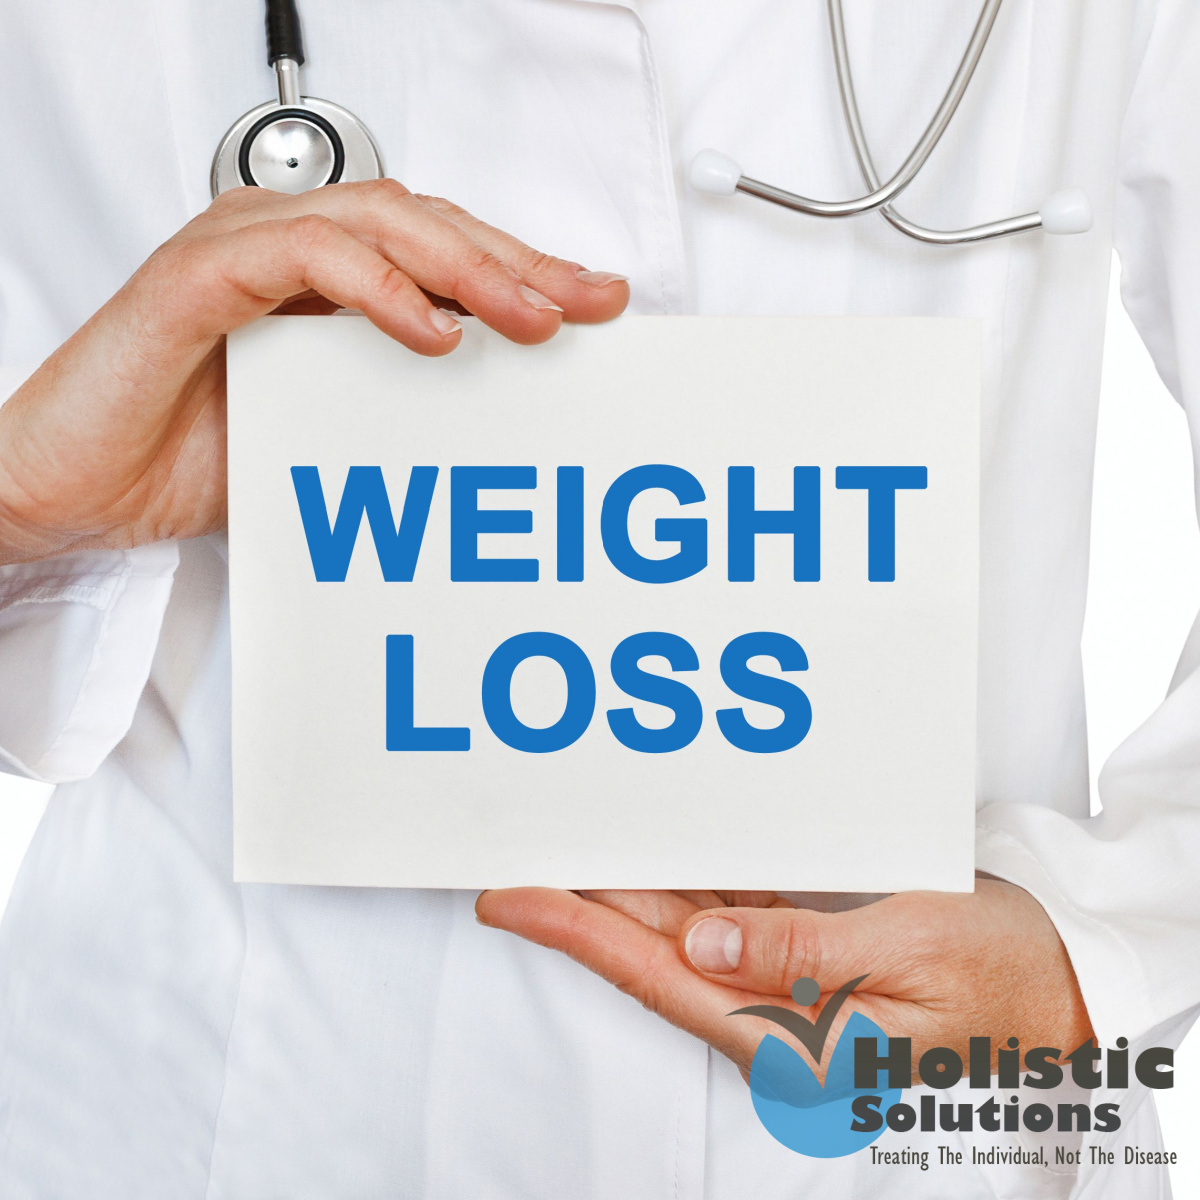 Utilizing Natural HCG Injections For Safe, Effective Weight Loss